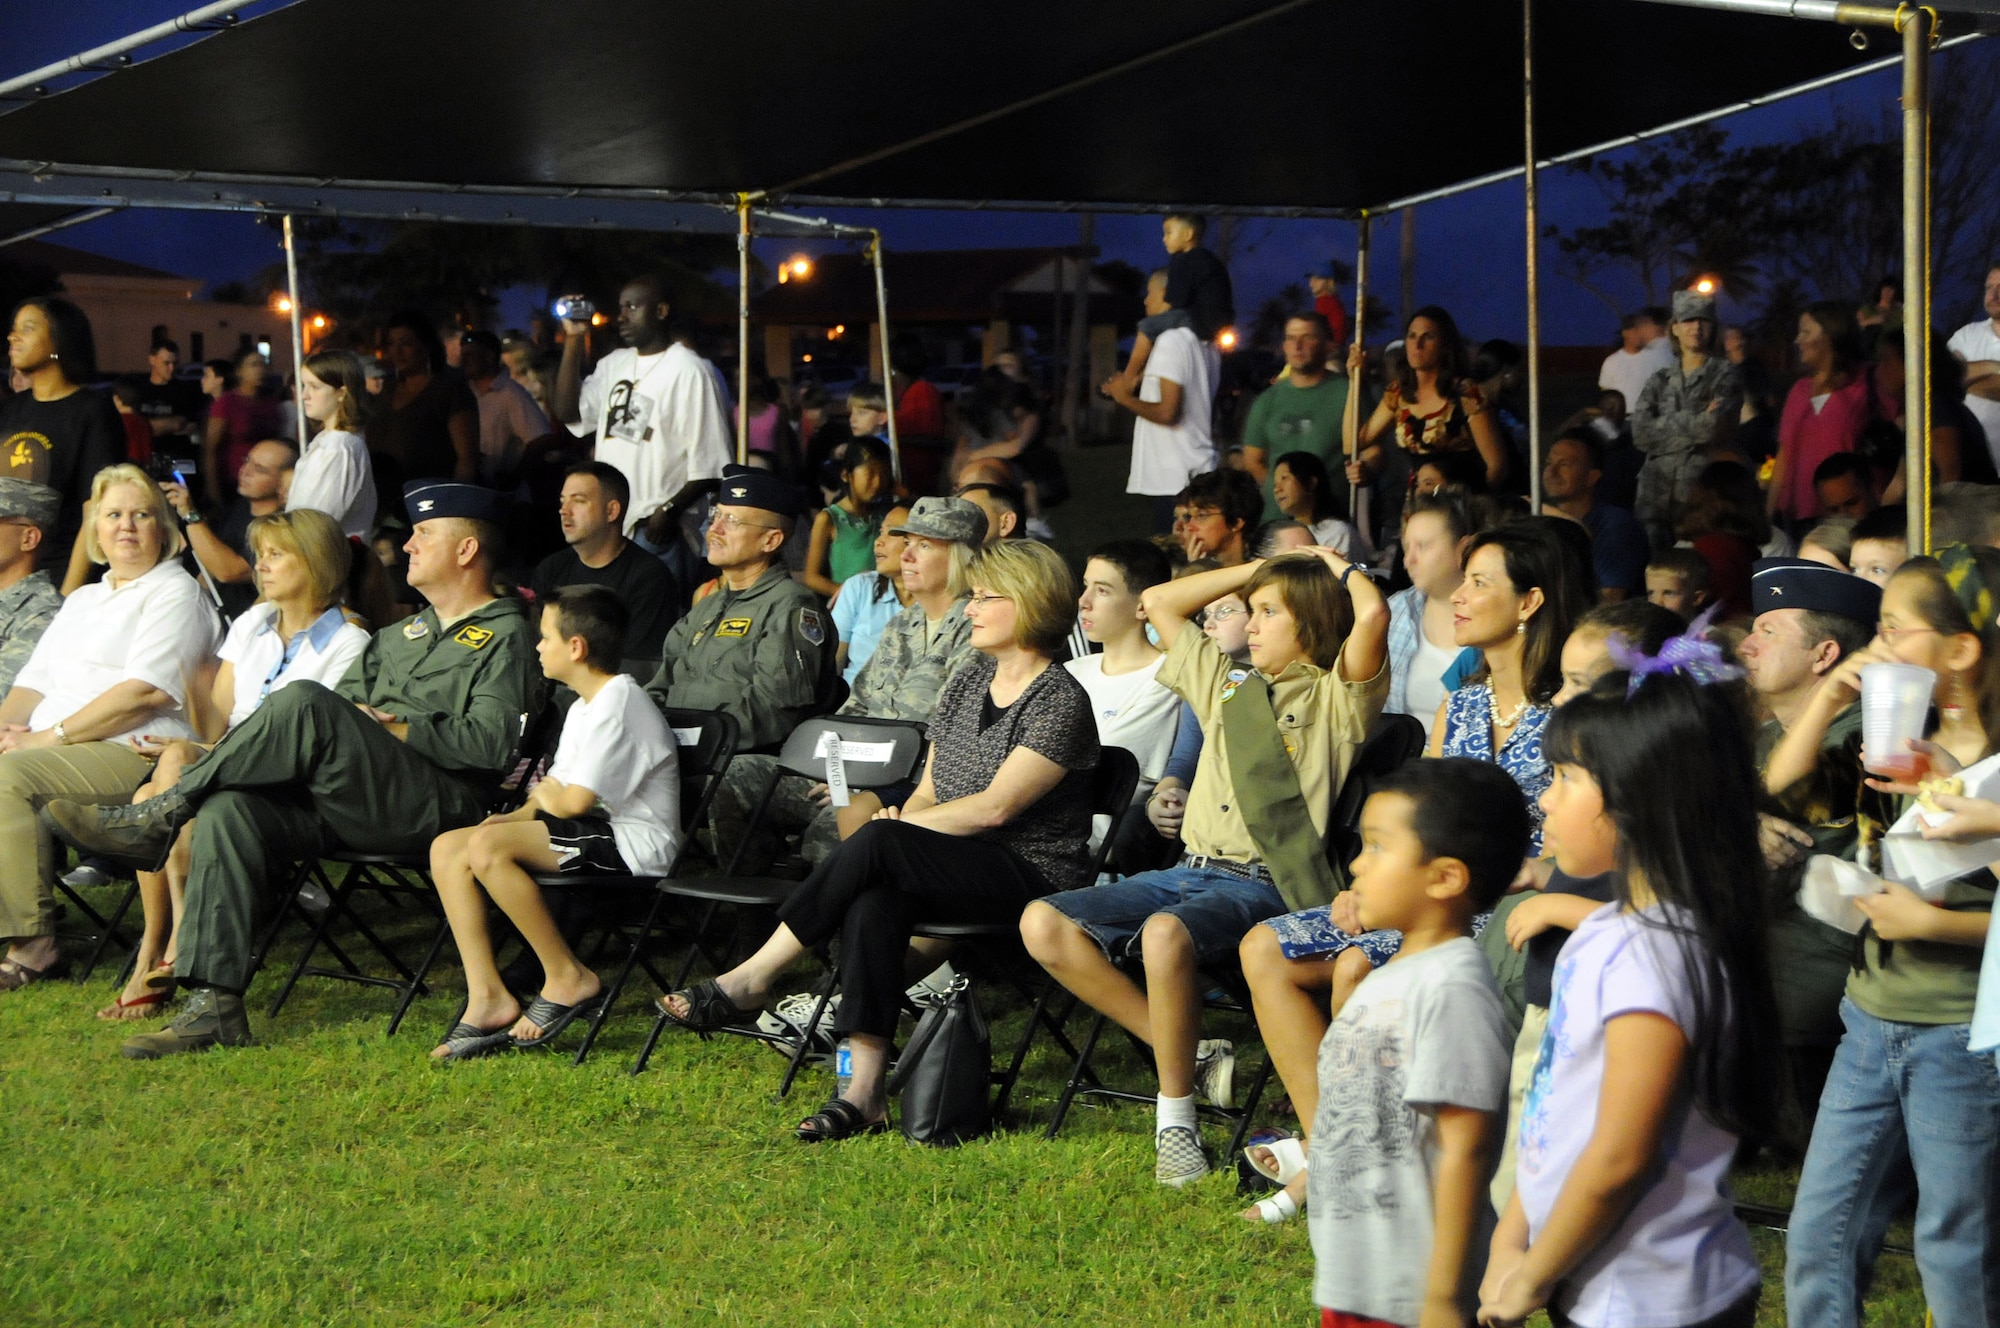 ANDERSEN AIR FORCE BASE, Guam - Commanders, their families and other guests enjoy the festivities at this year’s Christmas Tree Lighting celebration here Dec. 4. On-lookers enjoyed caroling, gospel choir, solos, lighting of the tree and last but not least Santa Claus. (U.S. Air Force photo by Airman 1st Class Courtney Witt)
